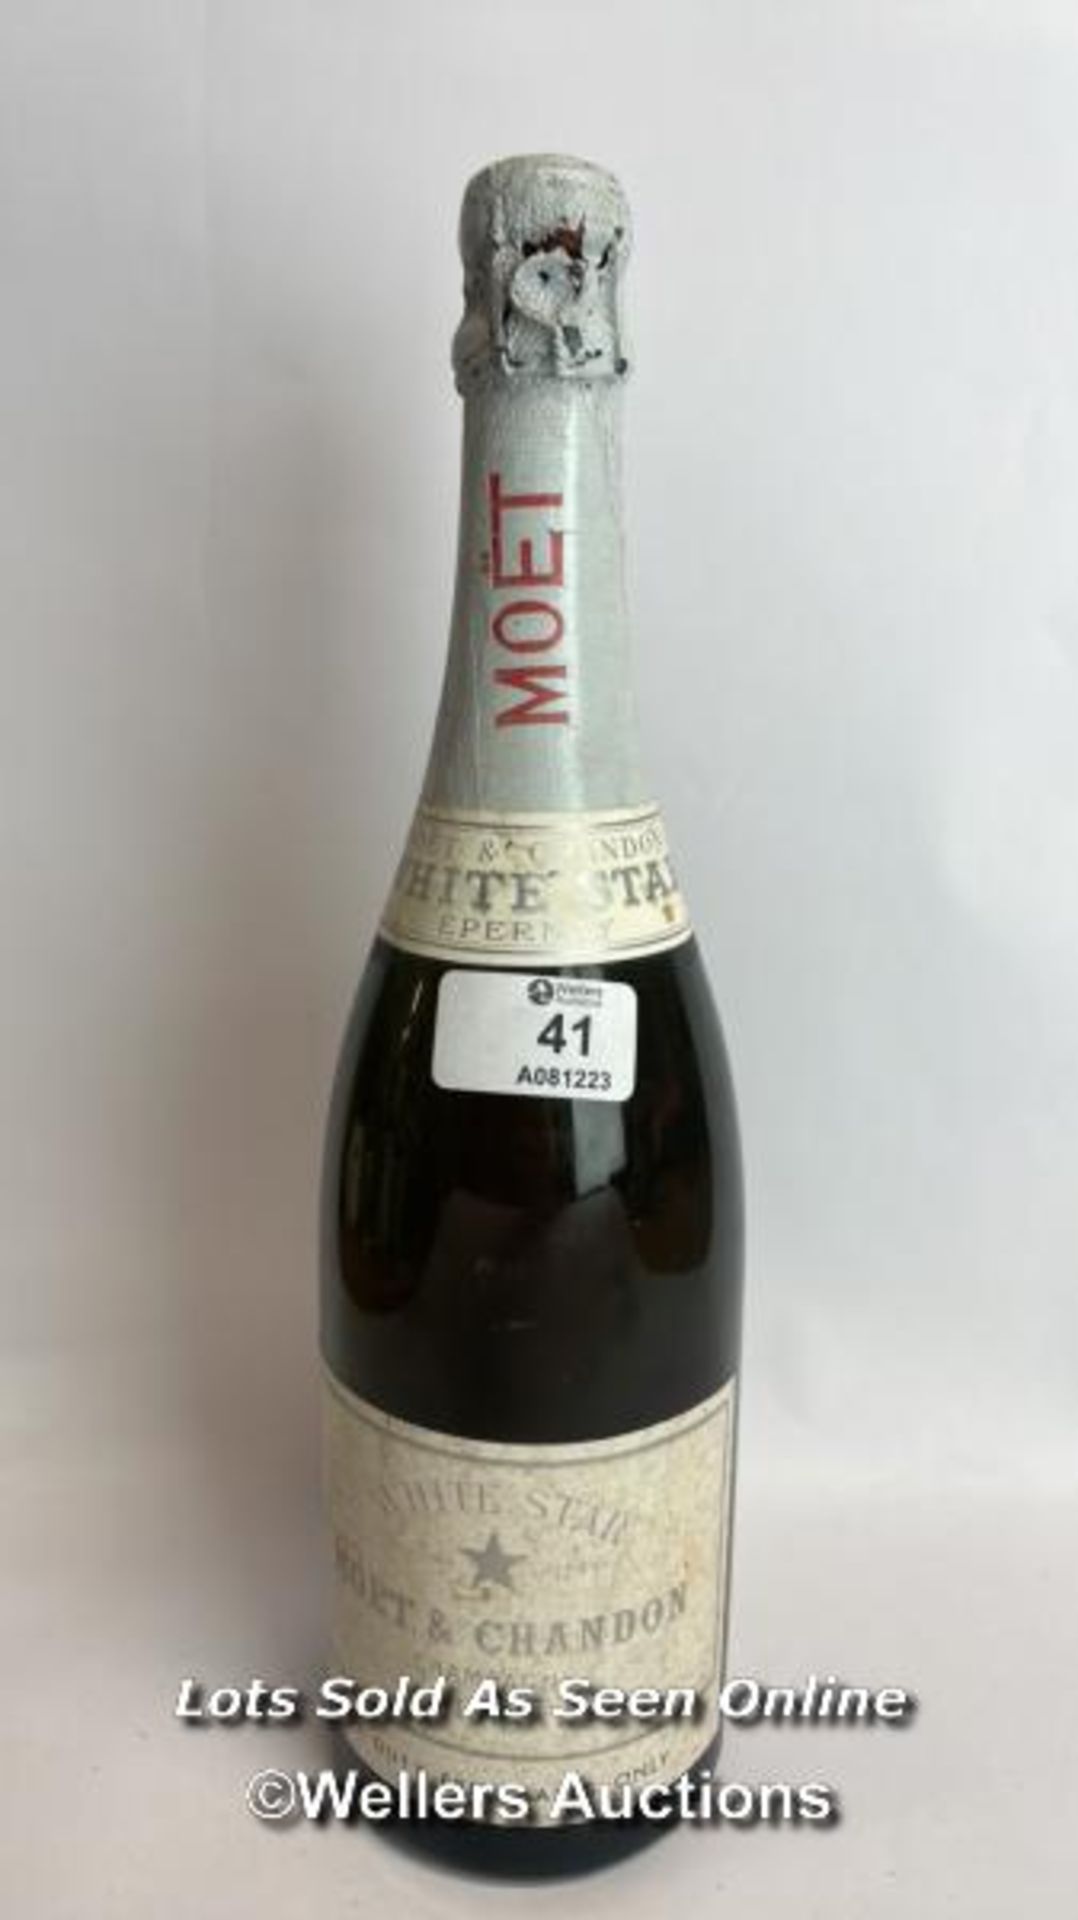 White Star Moet & Chandon Champagne Epernay, 75cl, NM3342272 / Please see images for fill level